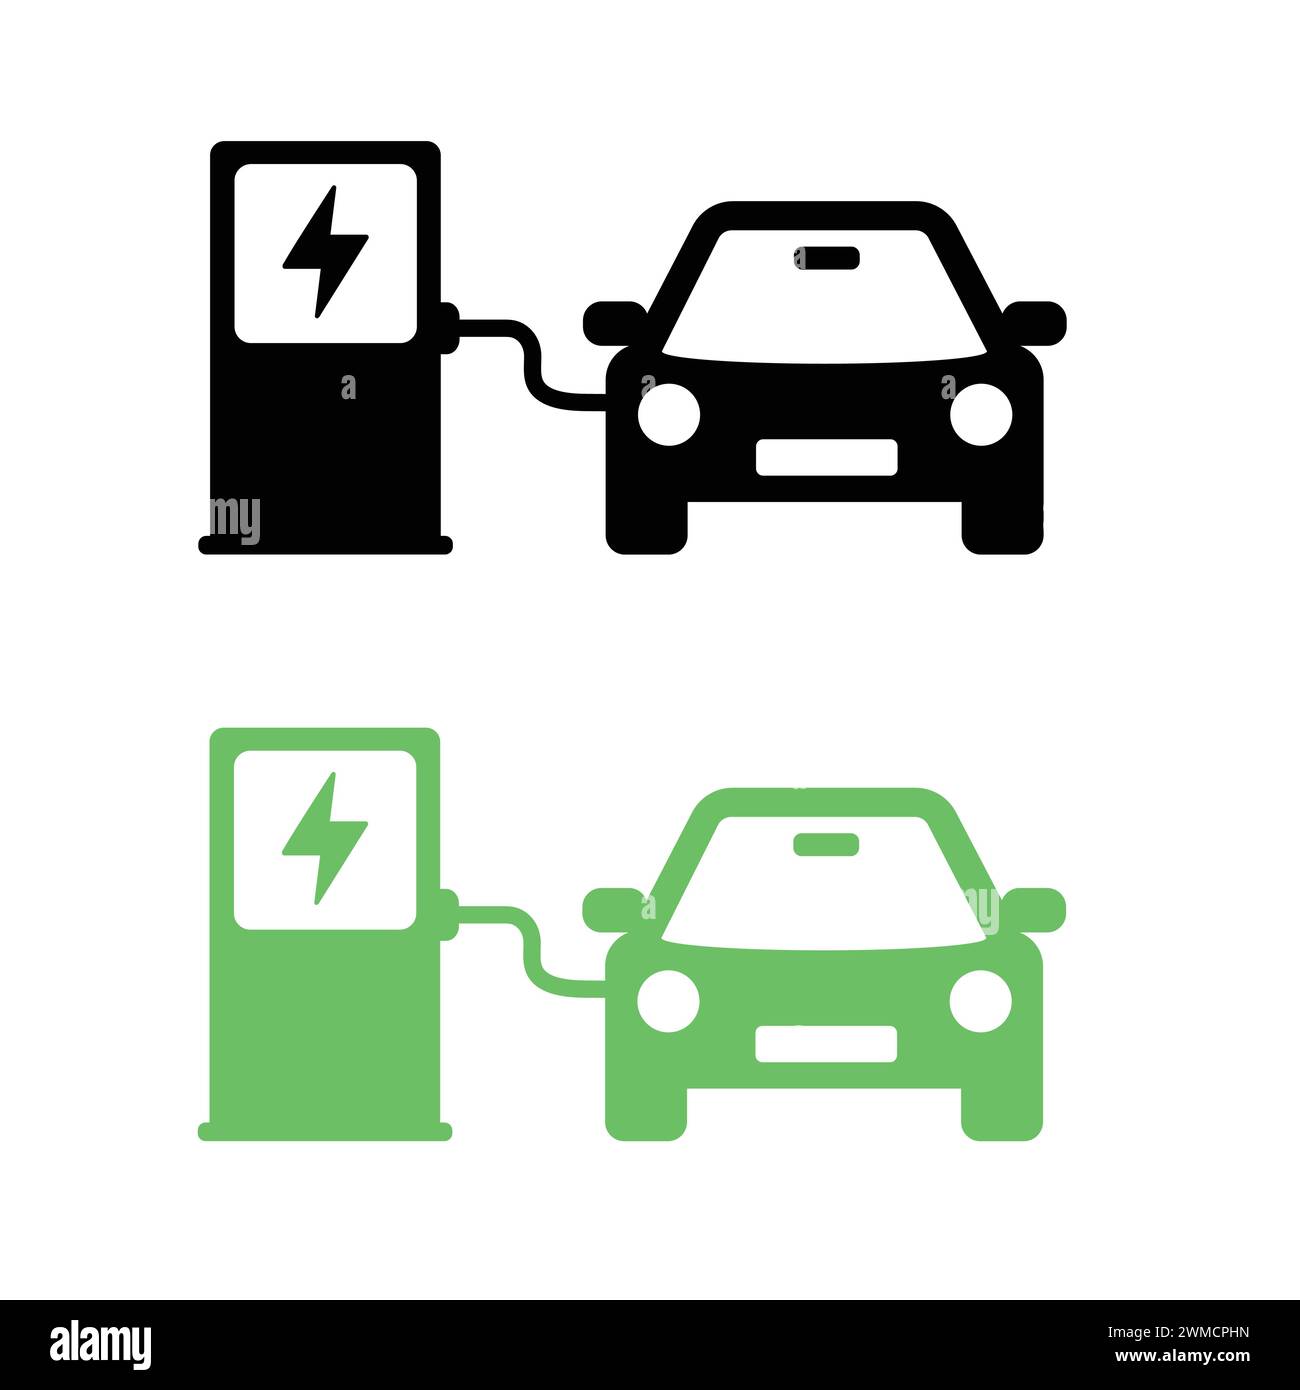 Electric Car Charging Station Vector Illustration. Green Vehicle Battery Refilling Icon. Electric Vehicle Charging Point. EV Car Hybrid Vehicle Charge Stock Vector